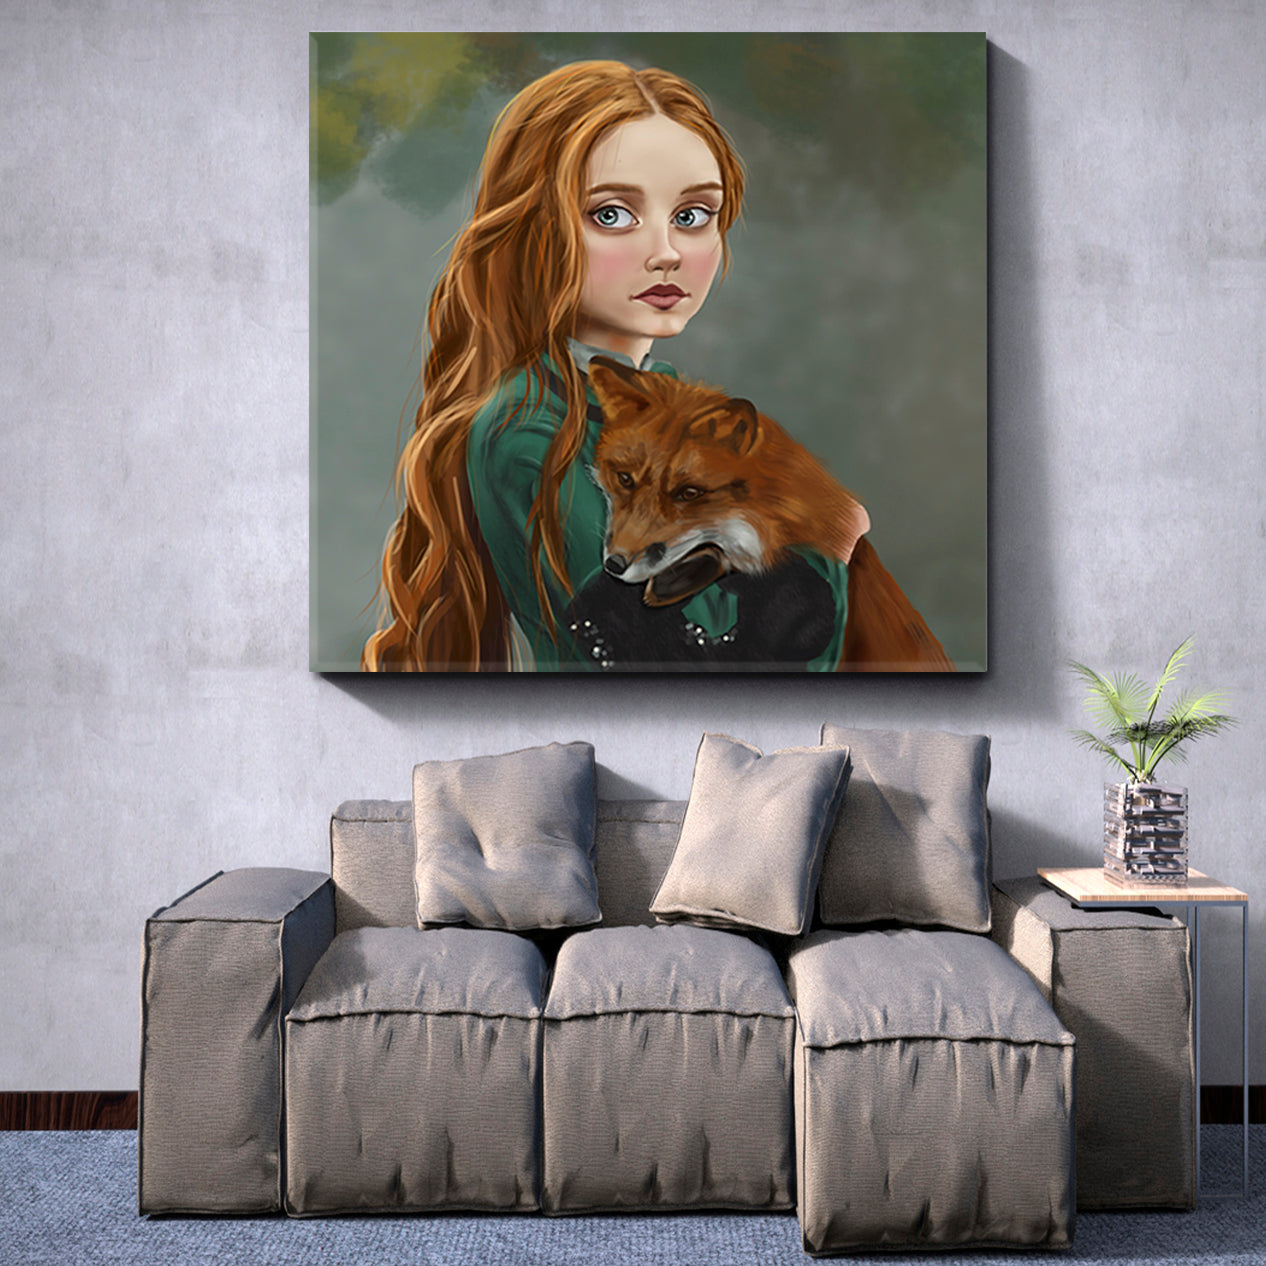 RED FOX GINGER STORY Girl Red Hair Lady Green Dress Surreal Fairy Tale Kids Room Canvas Art Print Artesty   